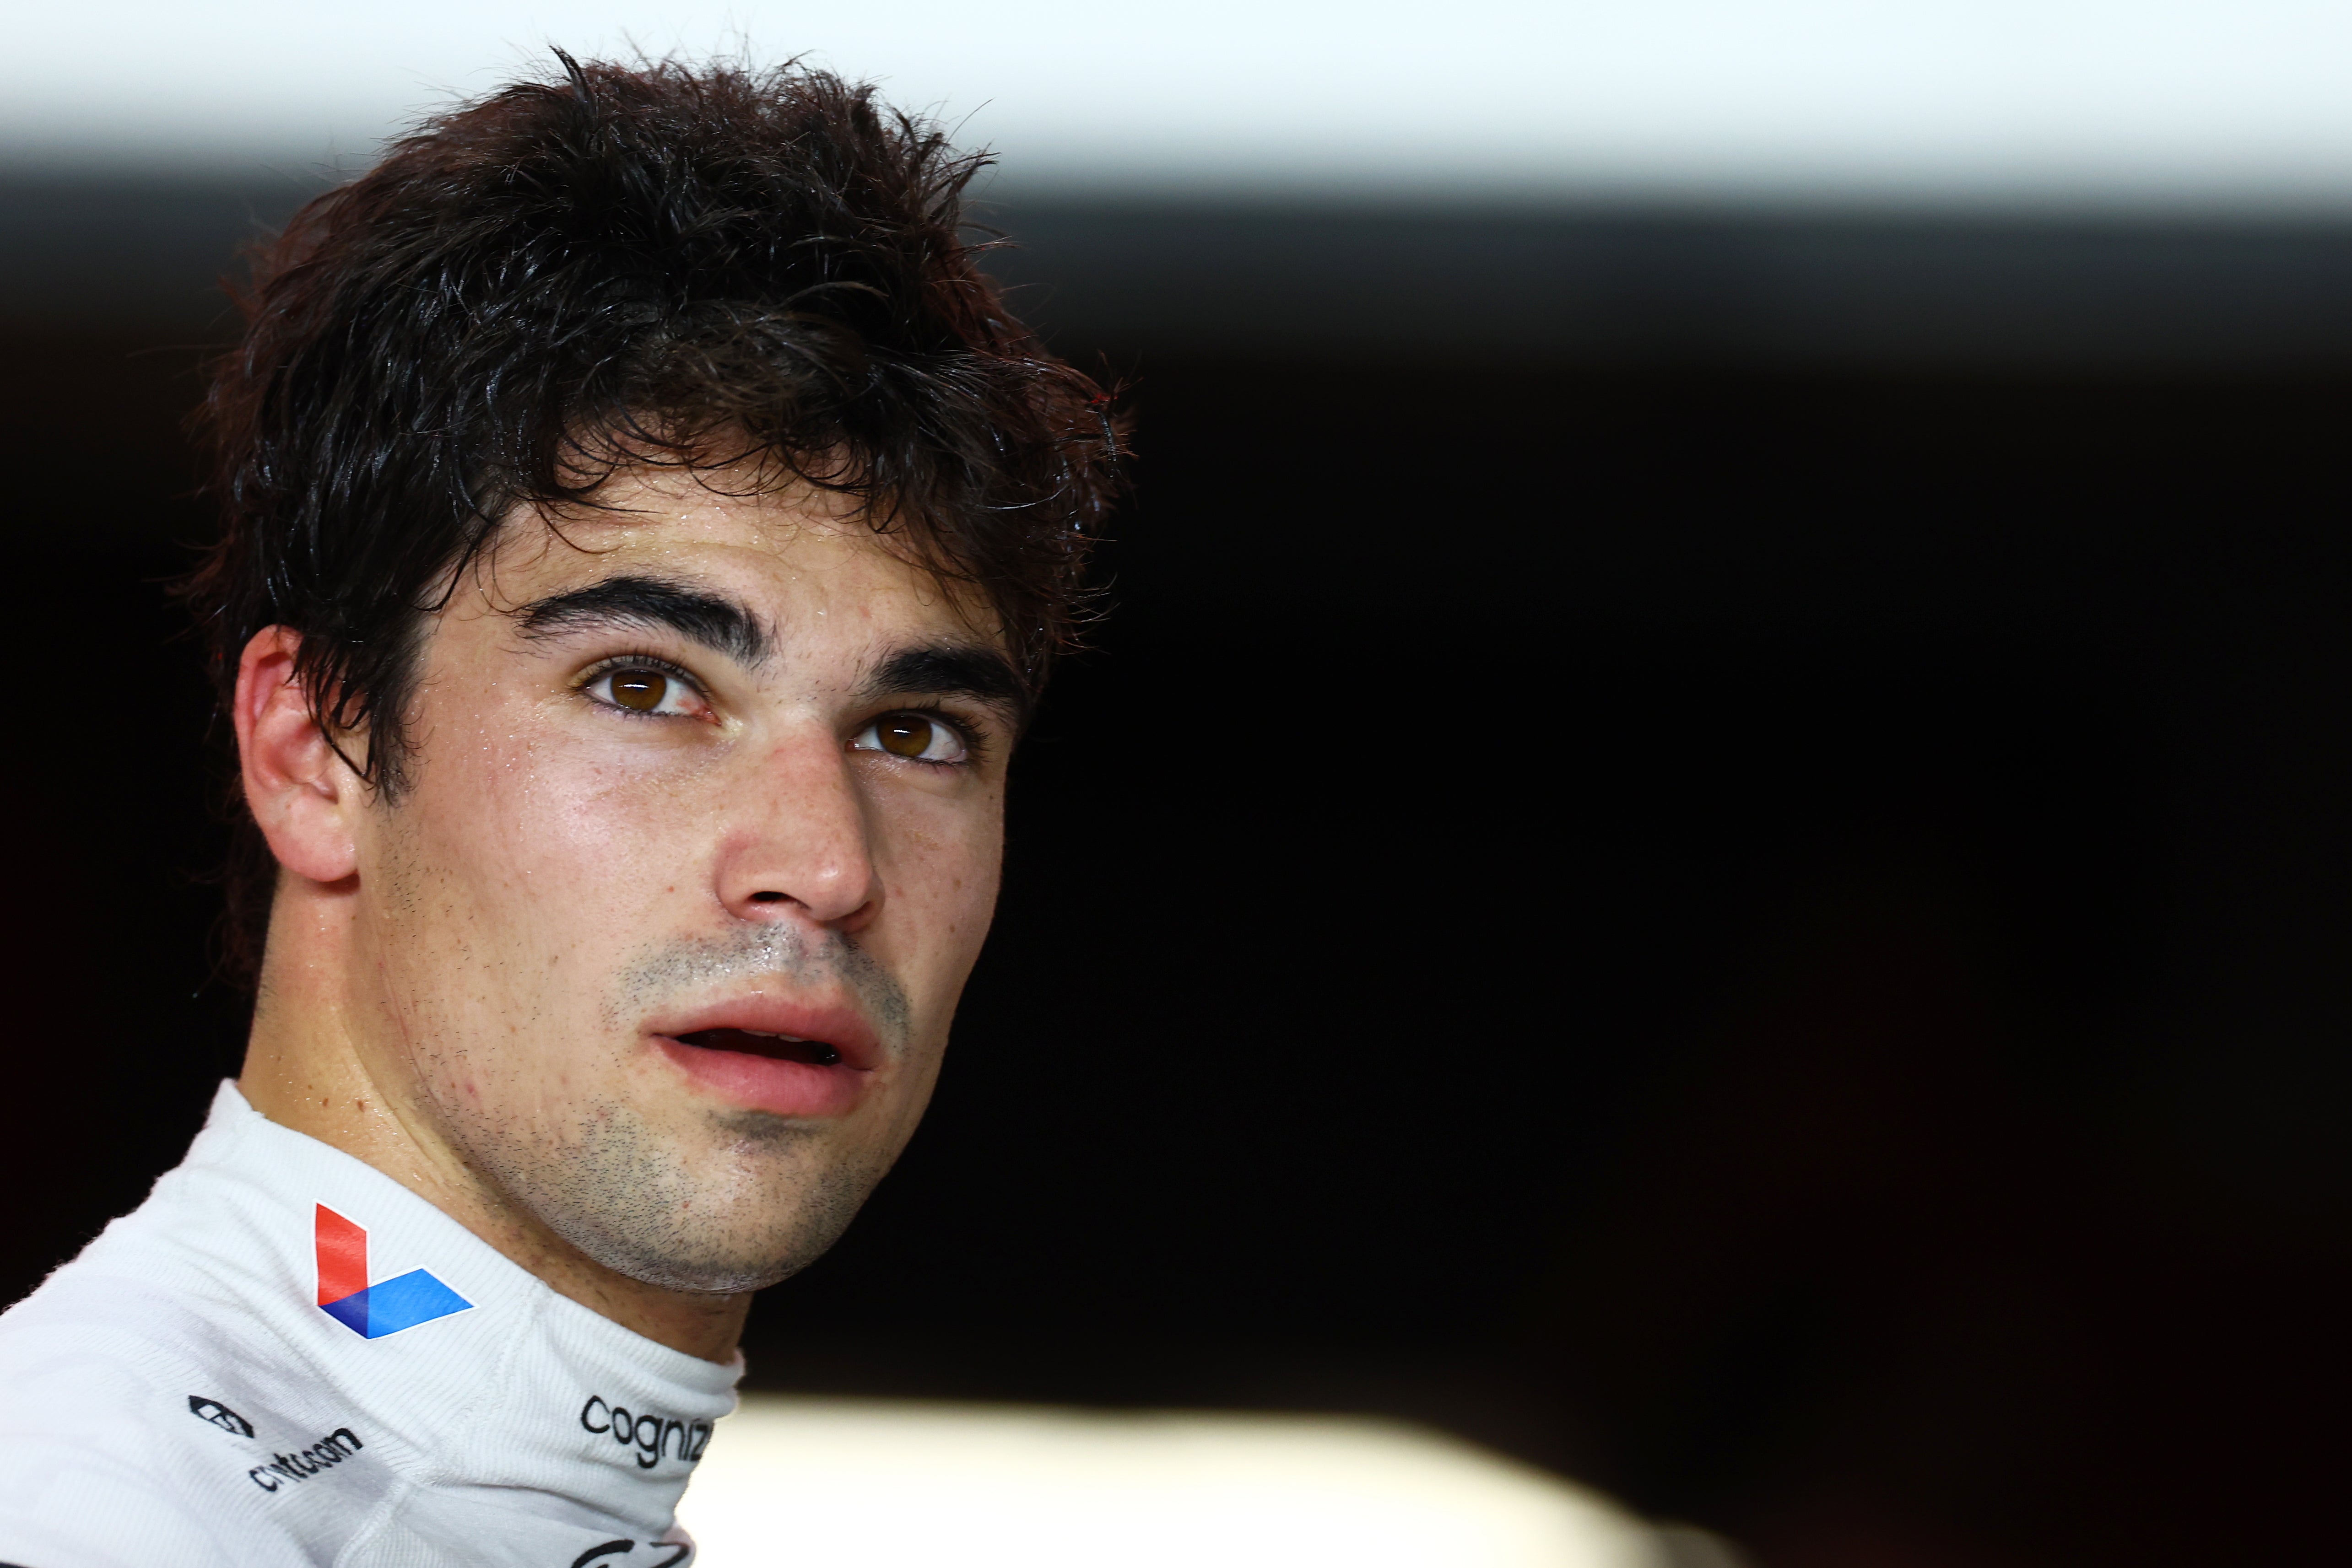 Lance Stroll claimed he passed out at the wheel during the Qatar Grand Prix